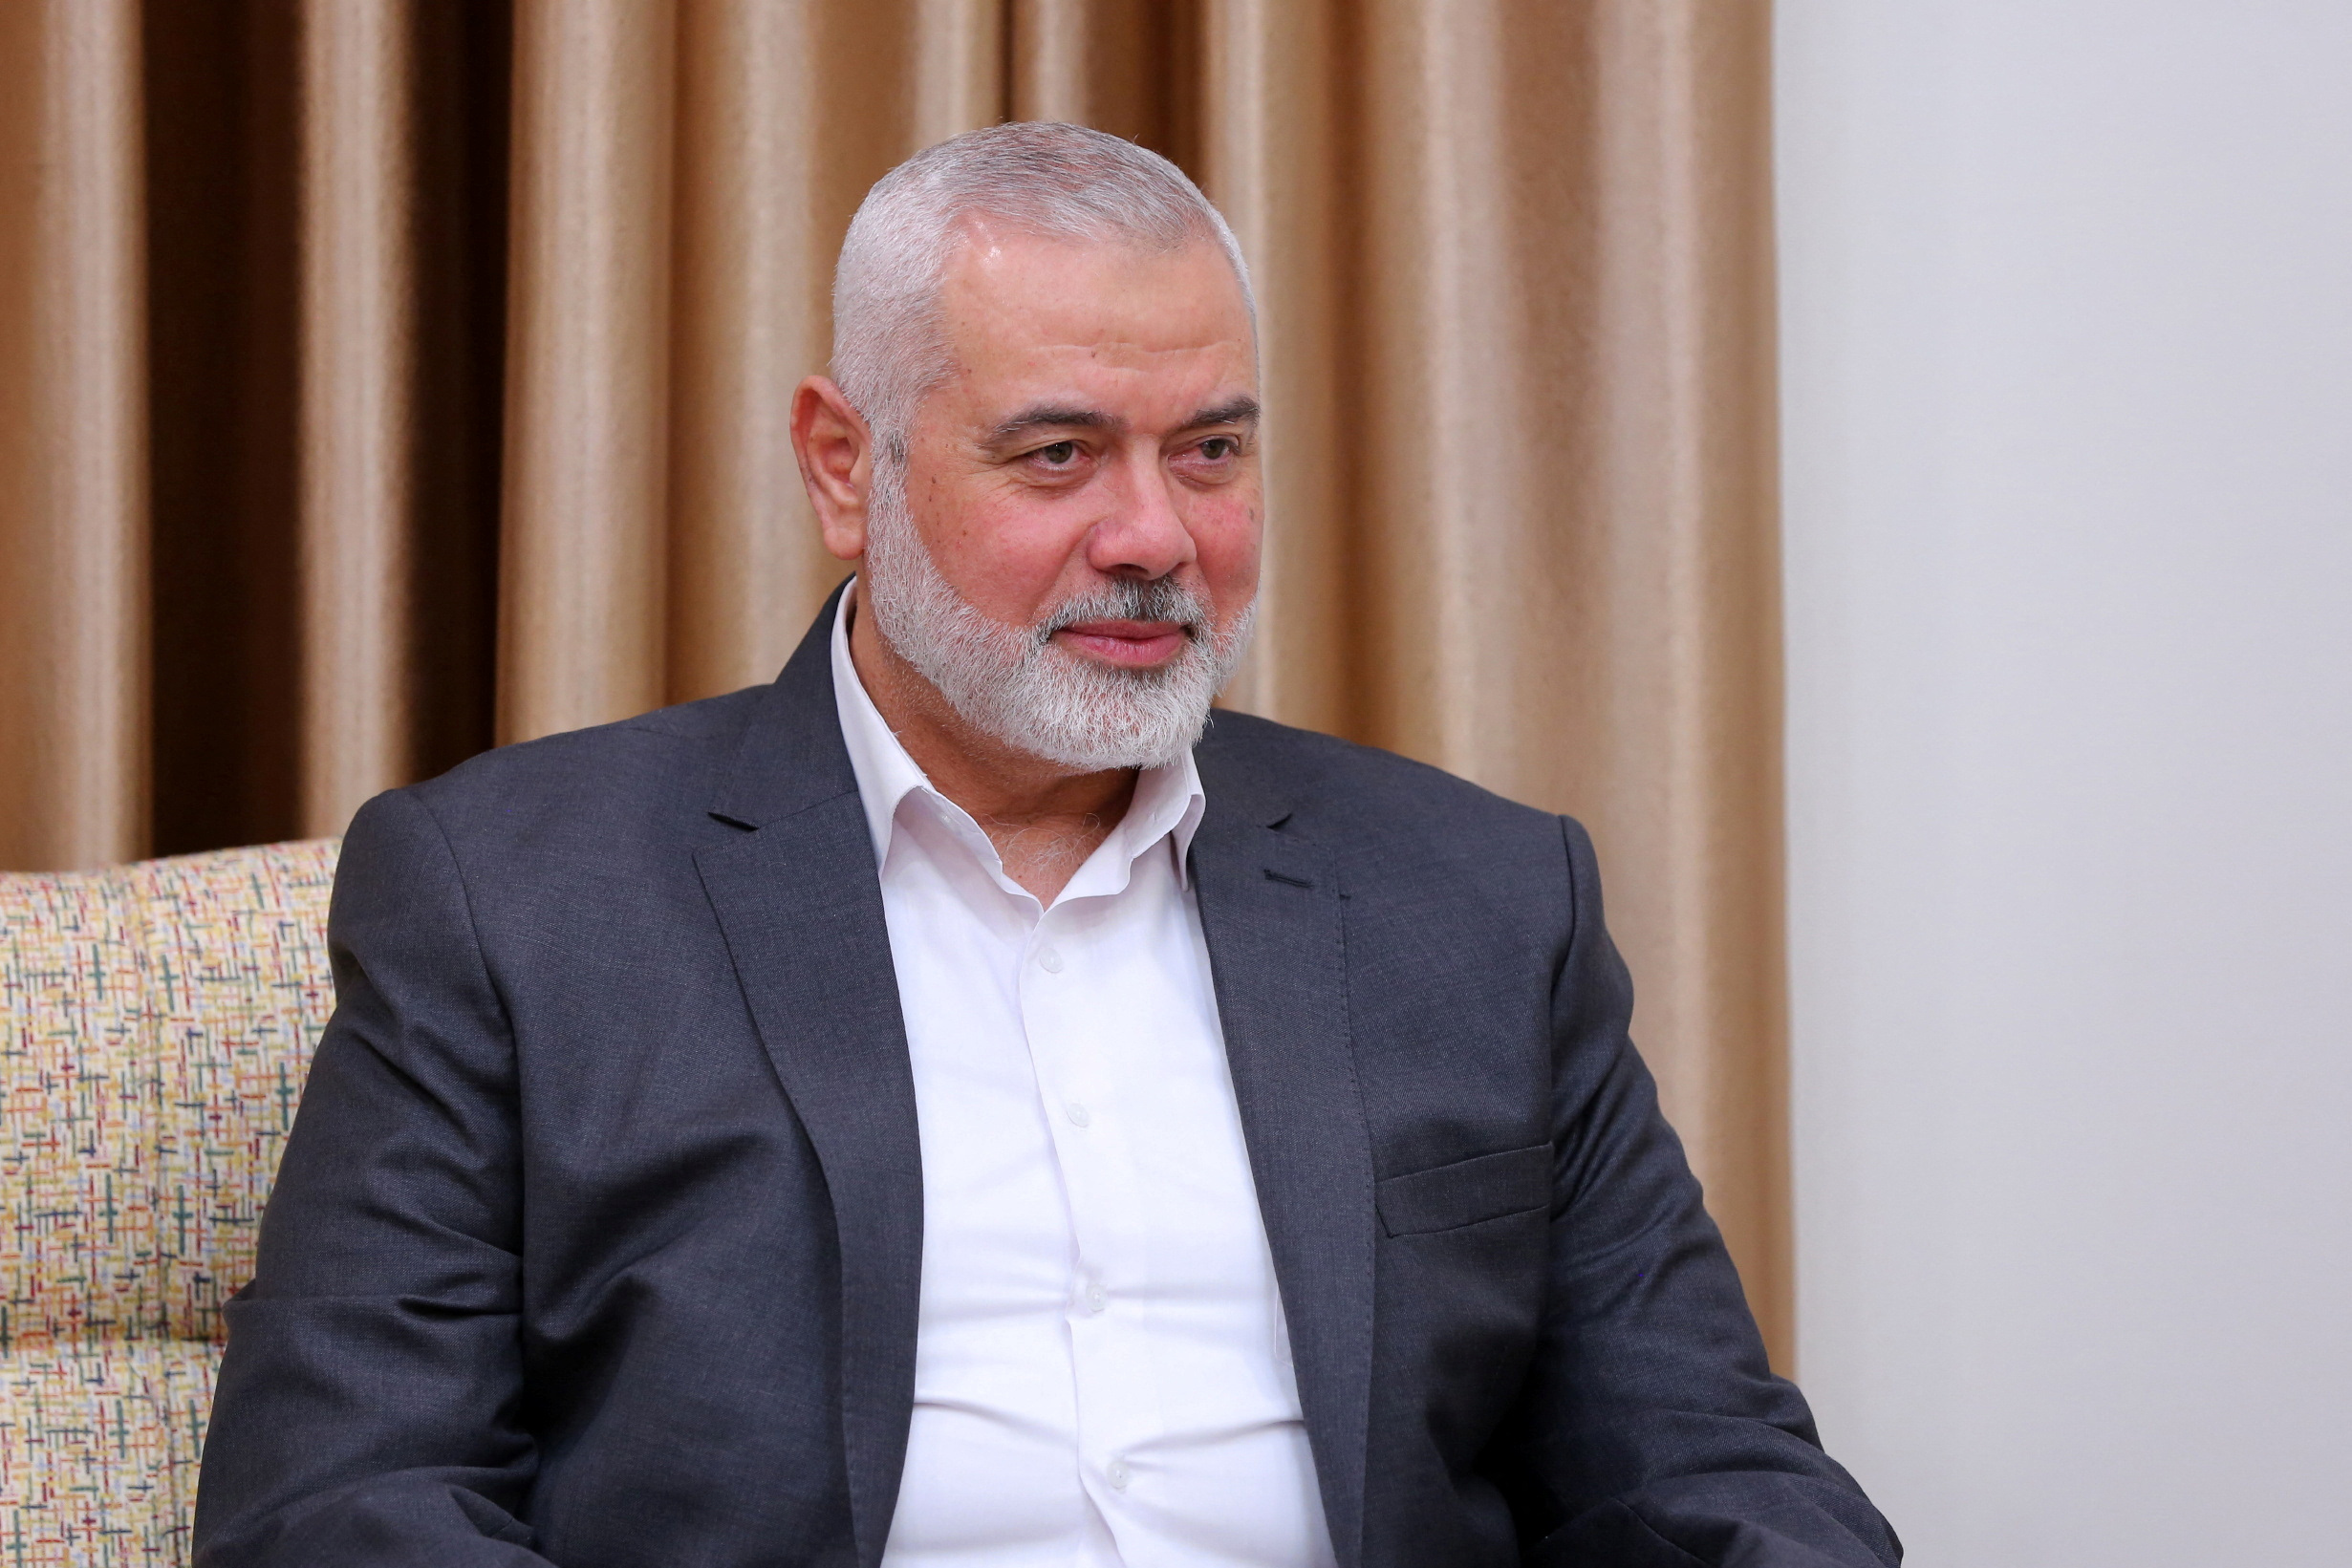 Hamas leader Haniyeh says Israel can't provide protection for Arab  countries | Reuters